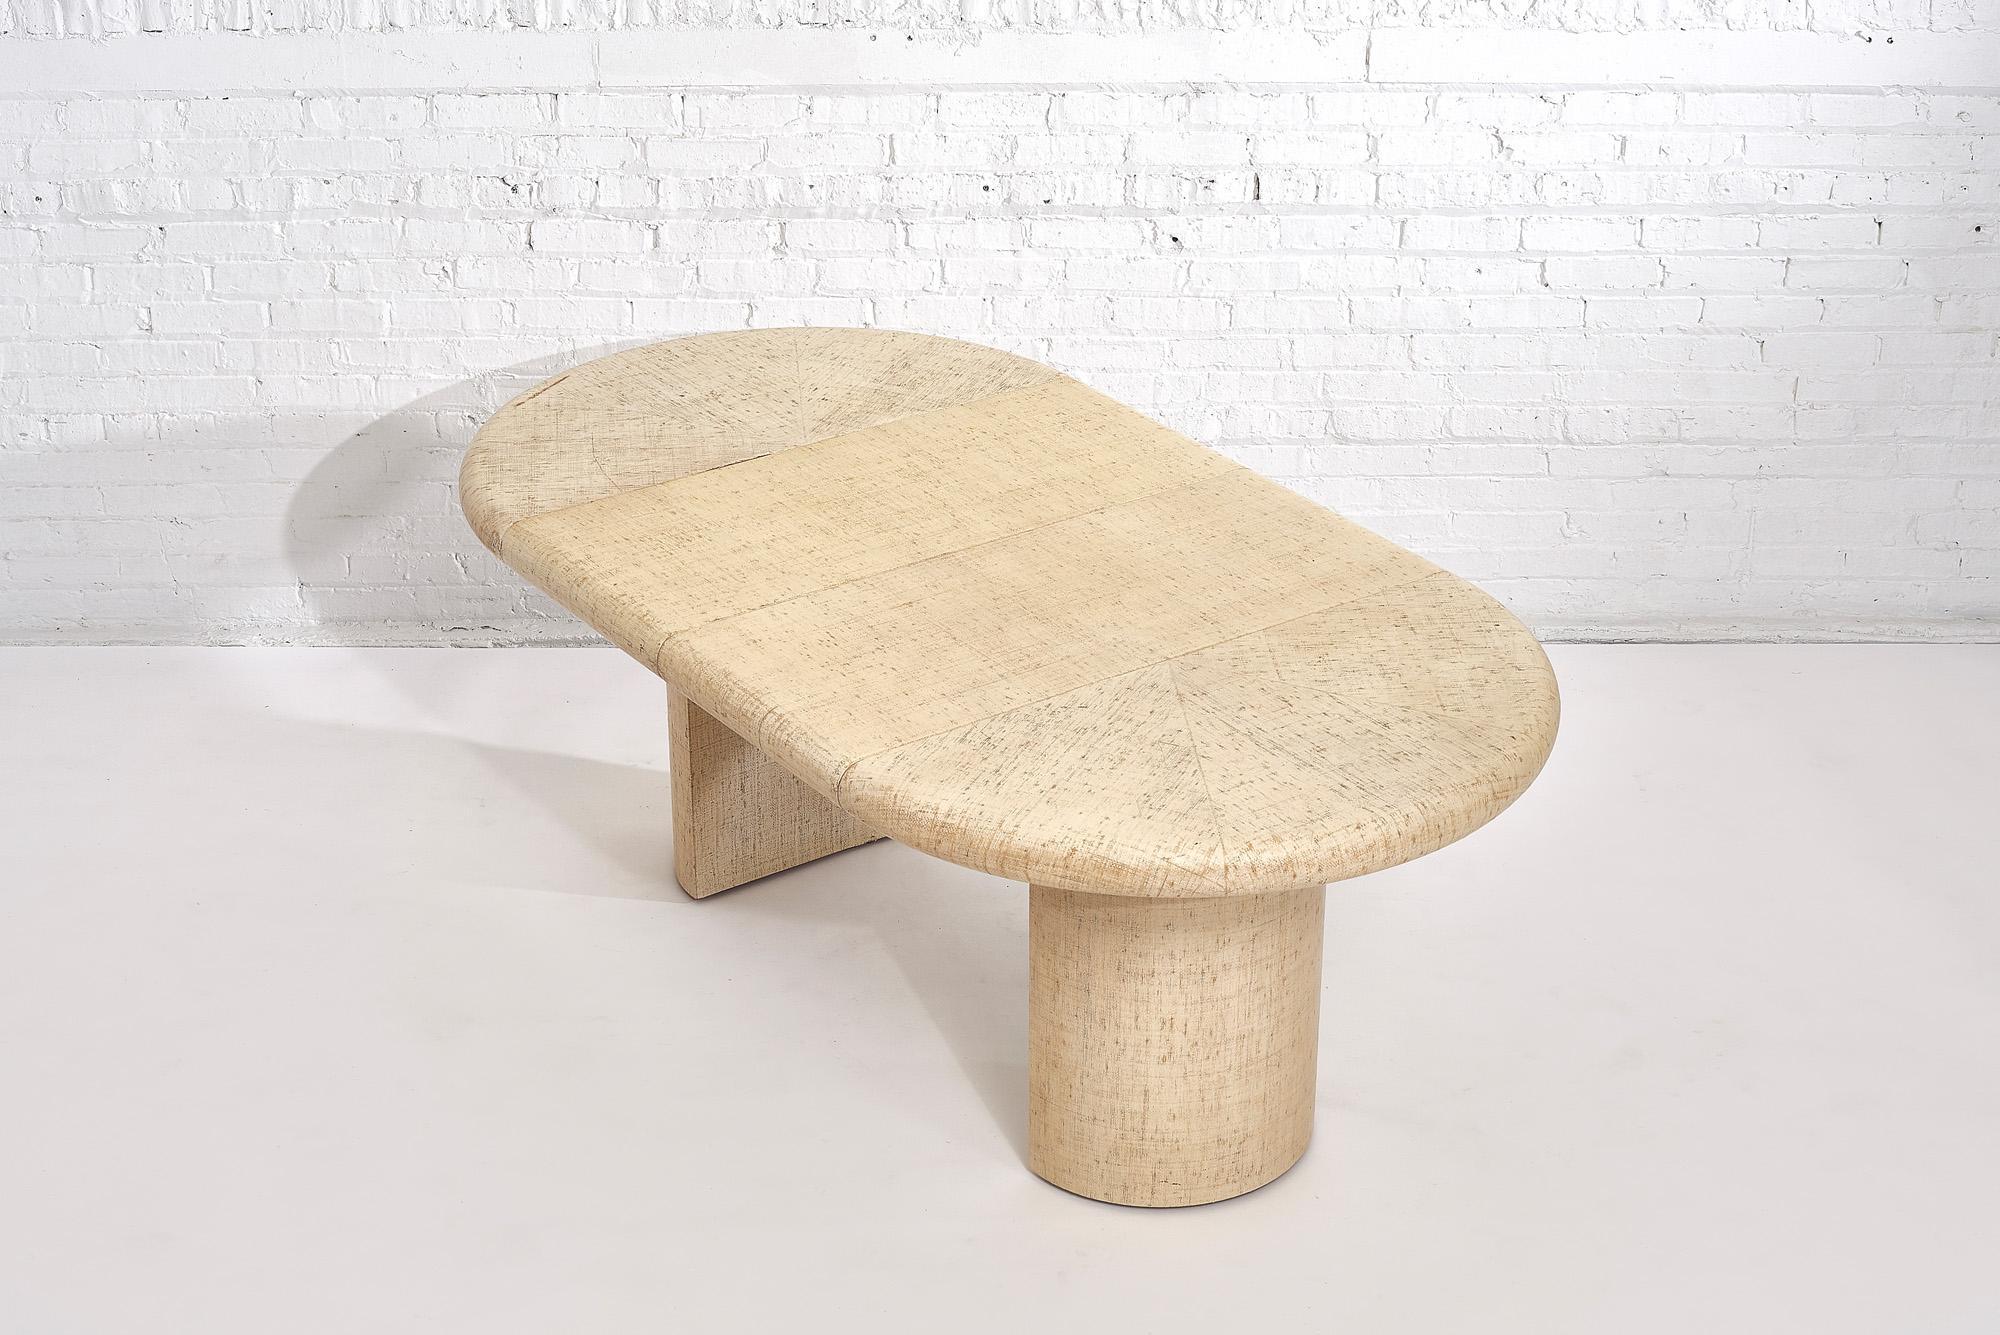 Early Karl Springer natural/ivory lacquered grasscloth dining table with thick bullnose edge, circa 1970. Round table that has a double pedestal base that splits when expanded to use leaves.